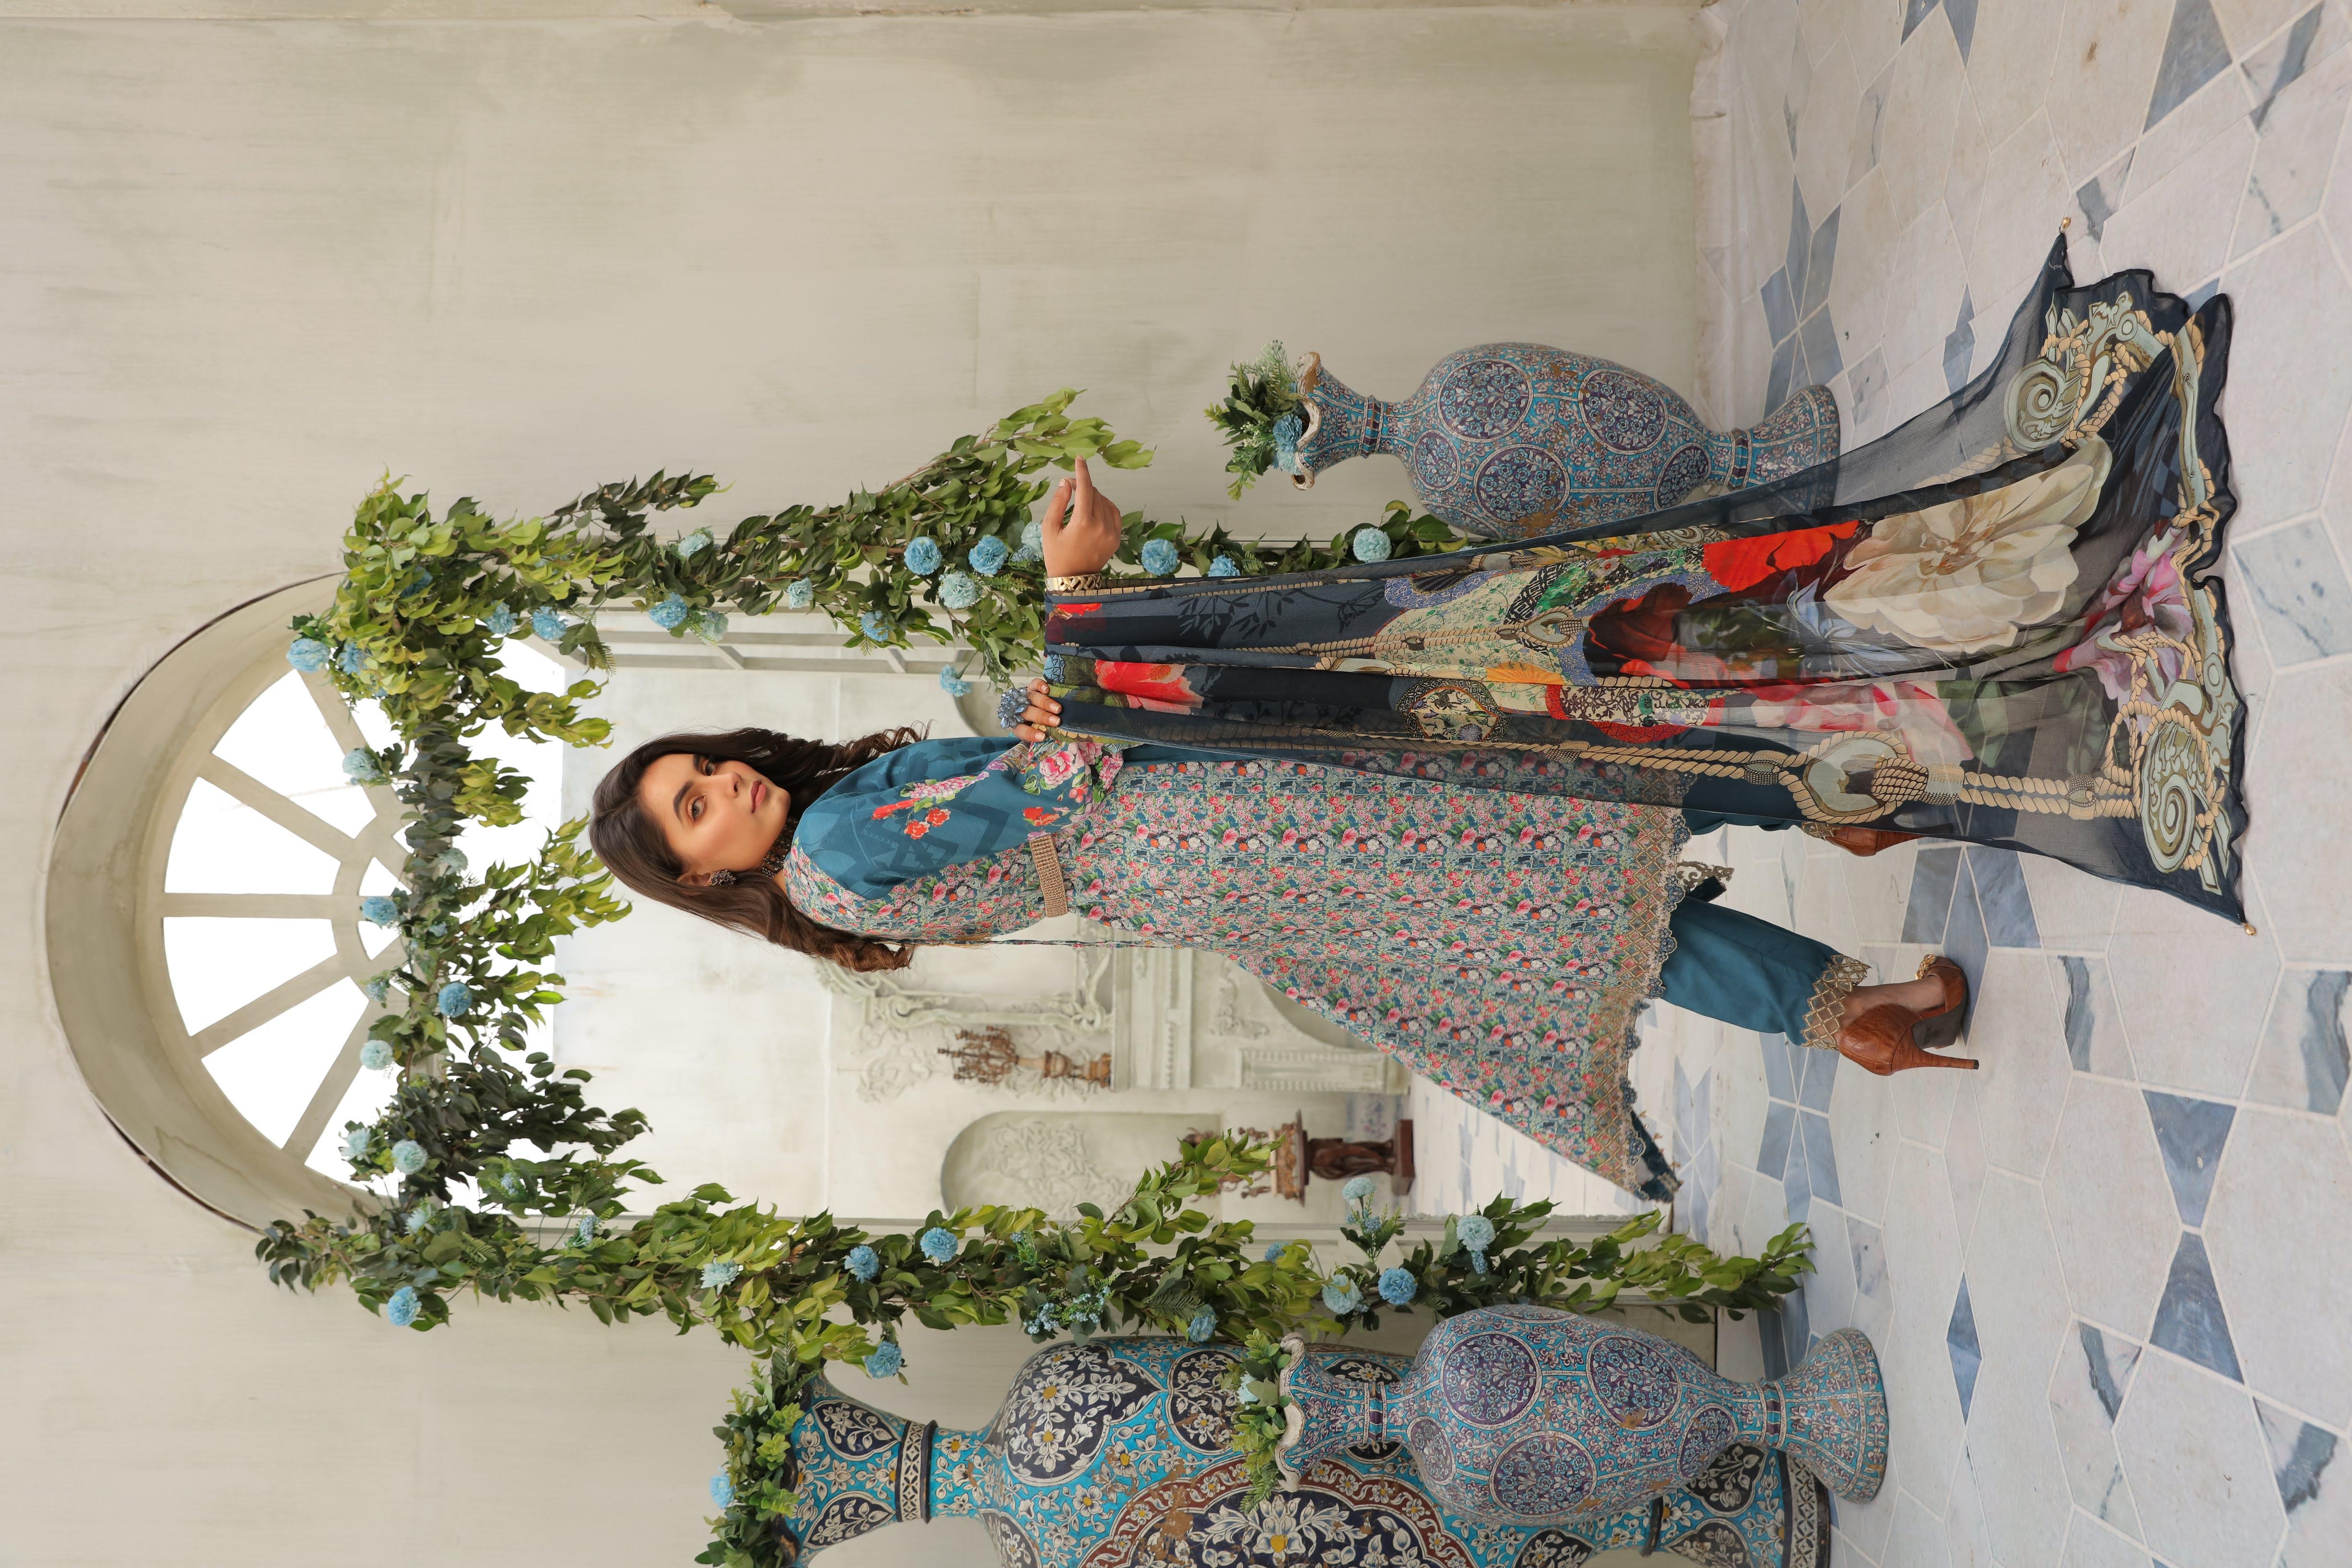 Ivana Kids Digital Print Side Trail Dress Eid Outfit with Embroidered Trousers S2044K Mother & Daughter - Desi Posh